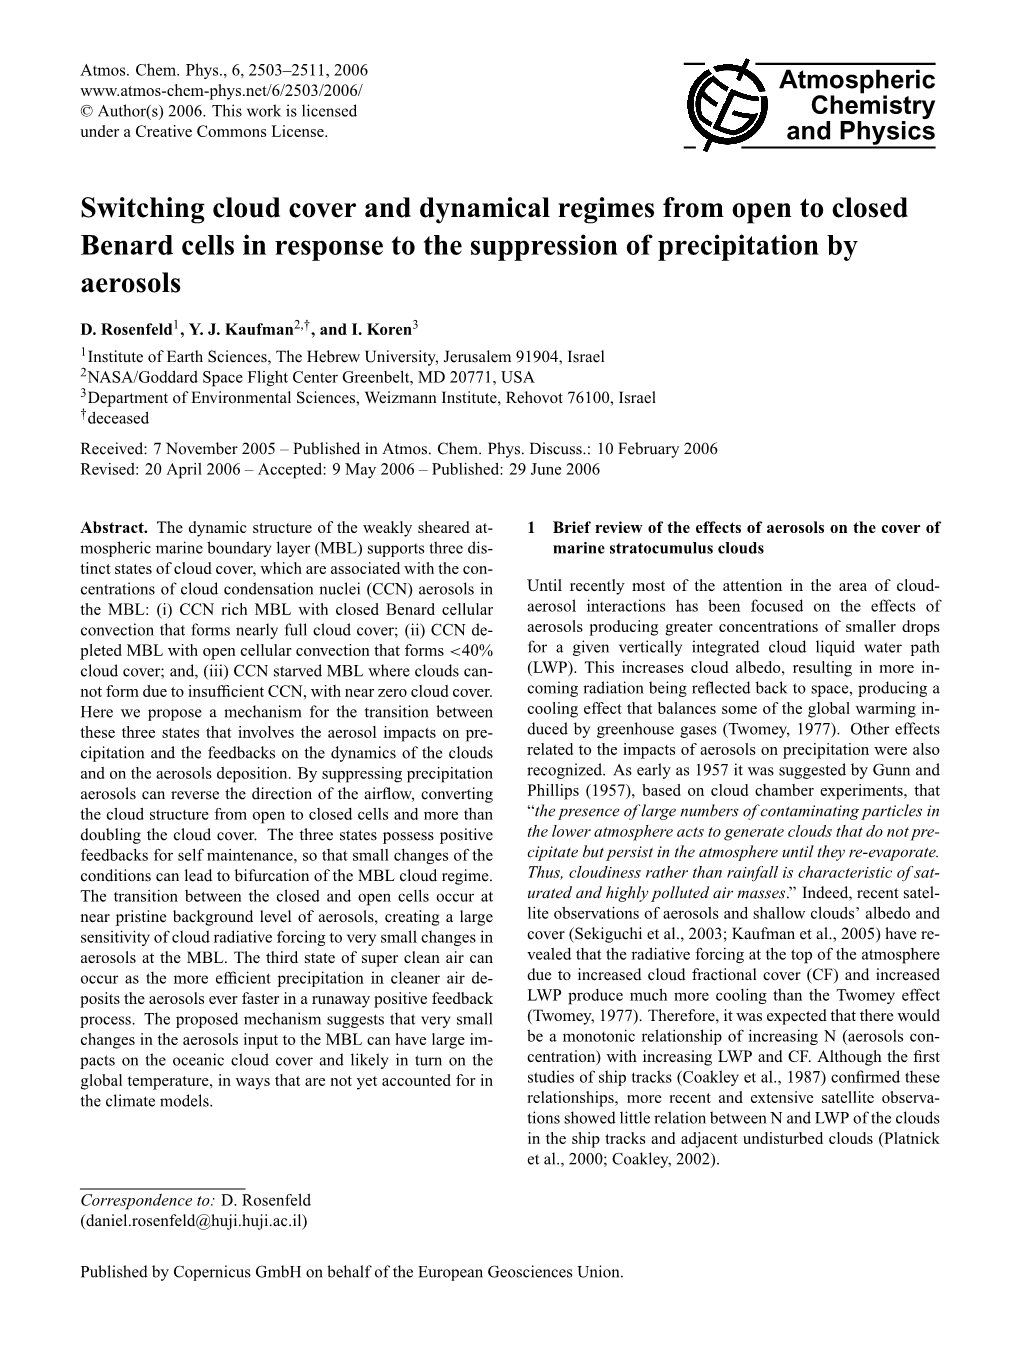 Switching Cloud Cover and Dynamical Regimes from Open to Closed Benard Cells in Response to the Suppression of Precipitation by Aerosols